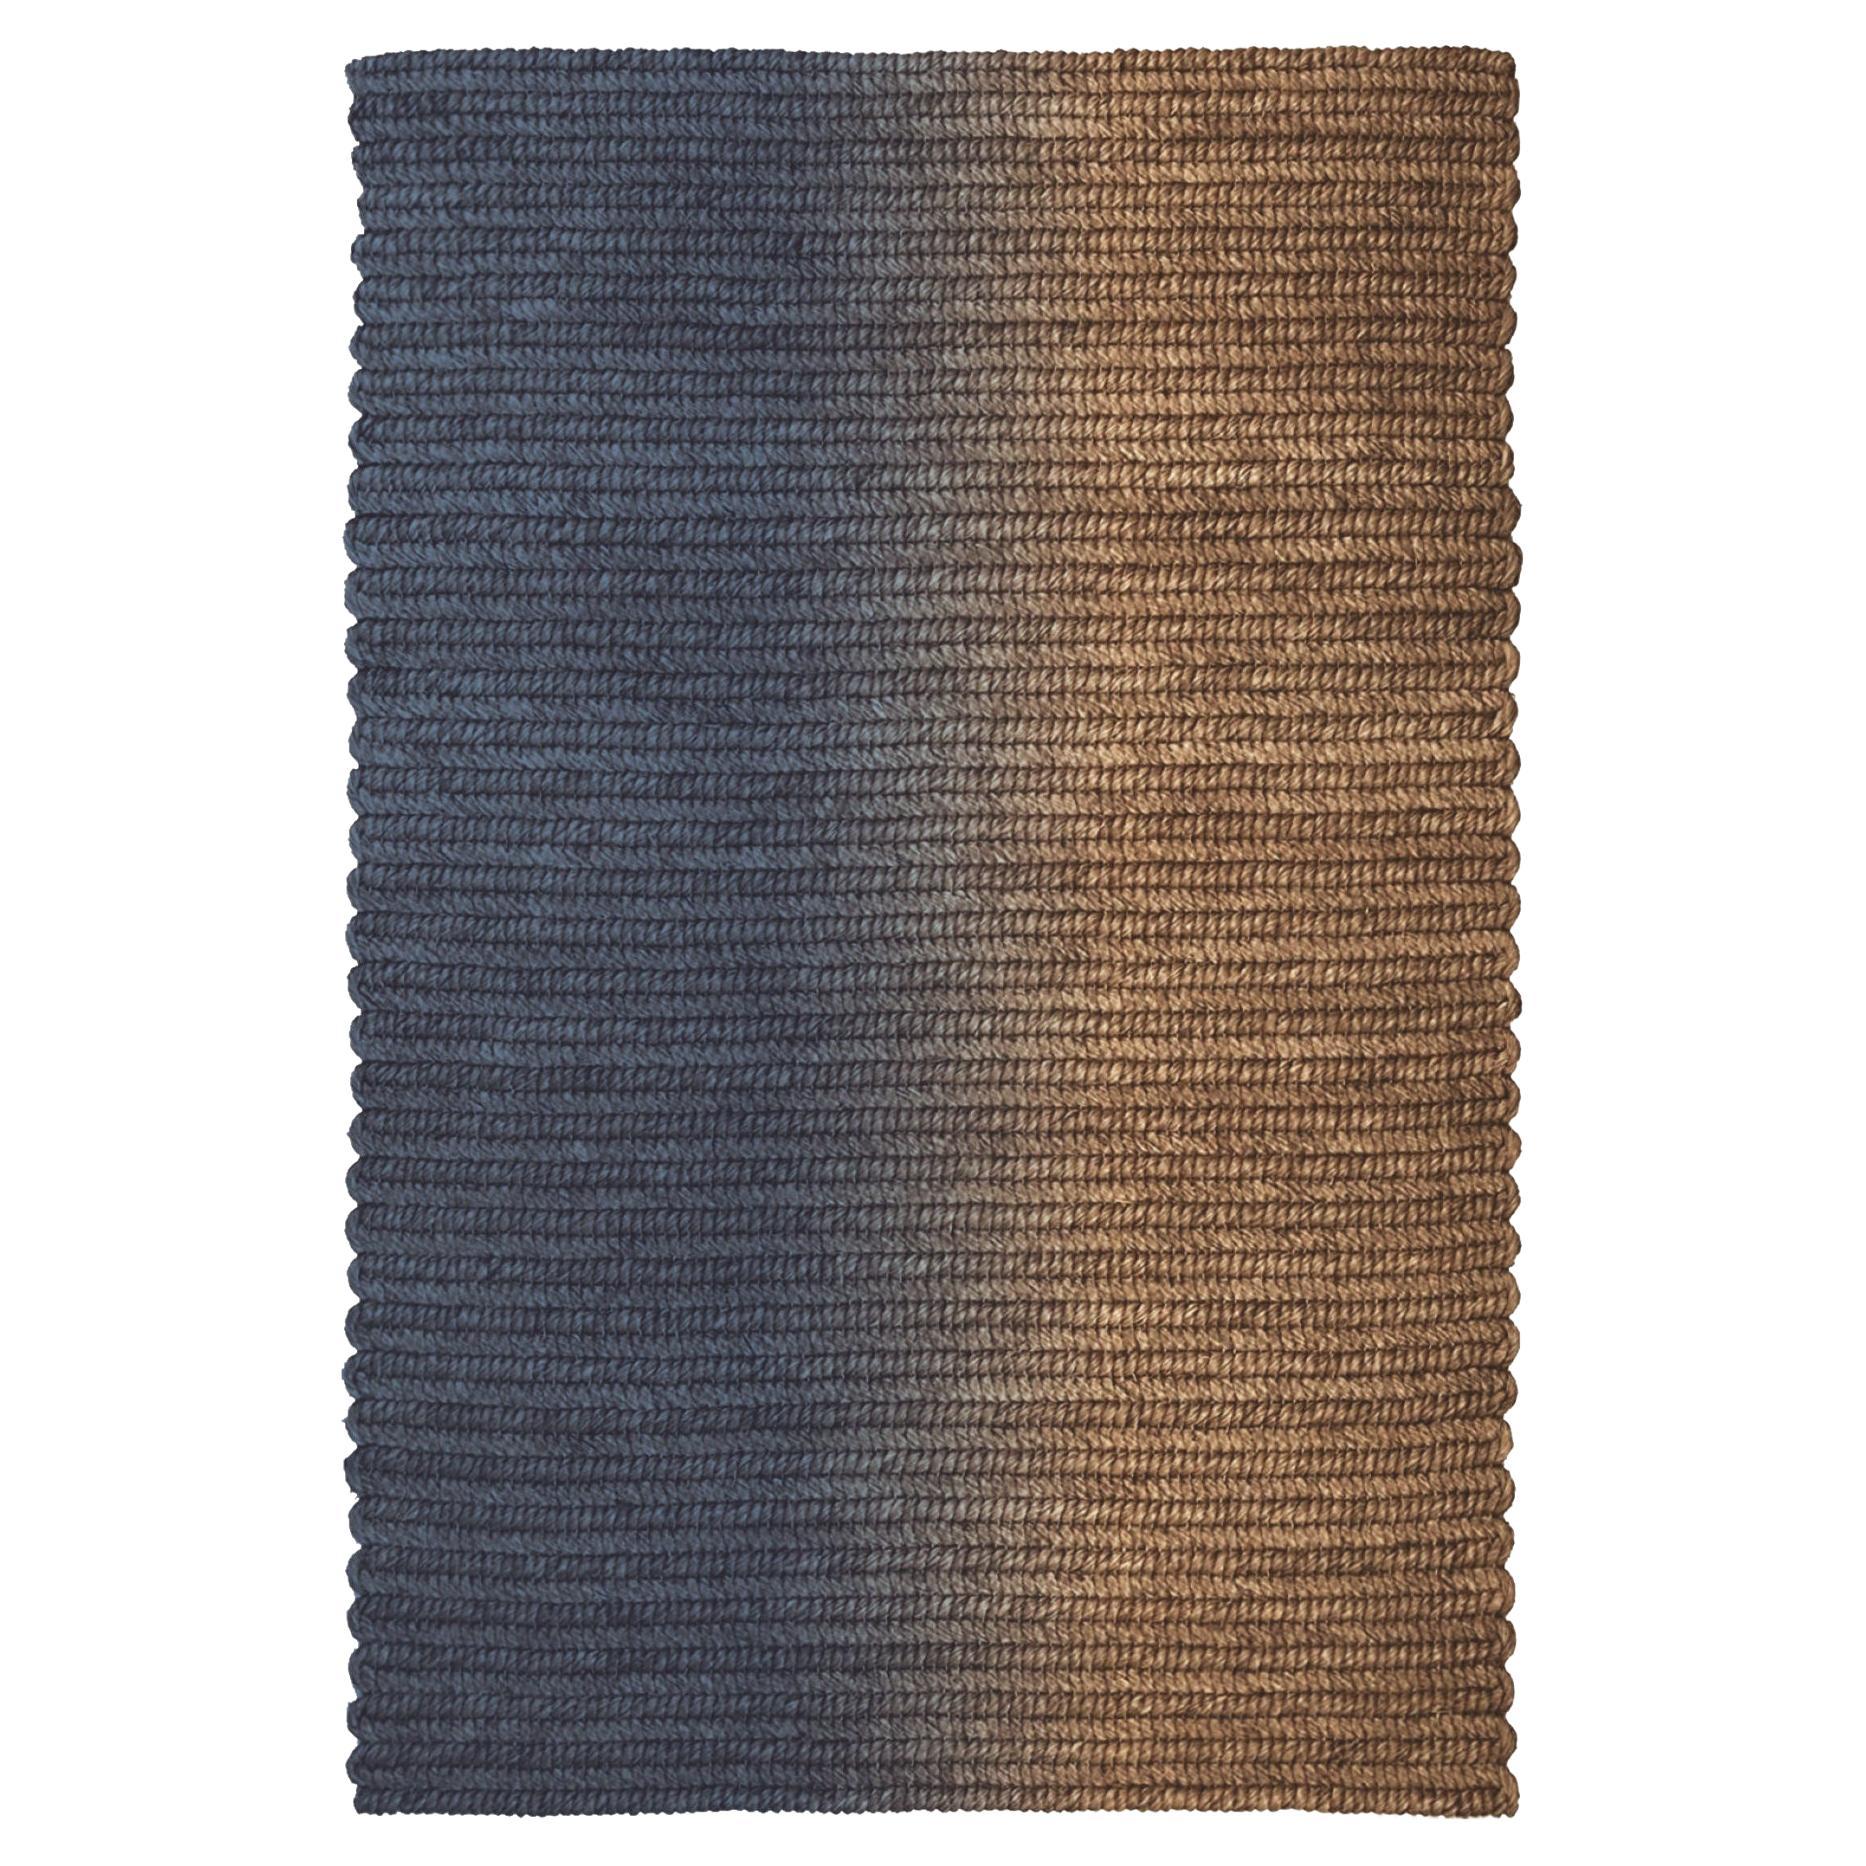 'Switch' Rug in Abaca, 'Royal Blue', by Claire Vos for Musett Design For Sale